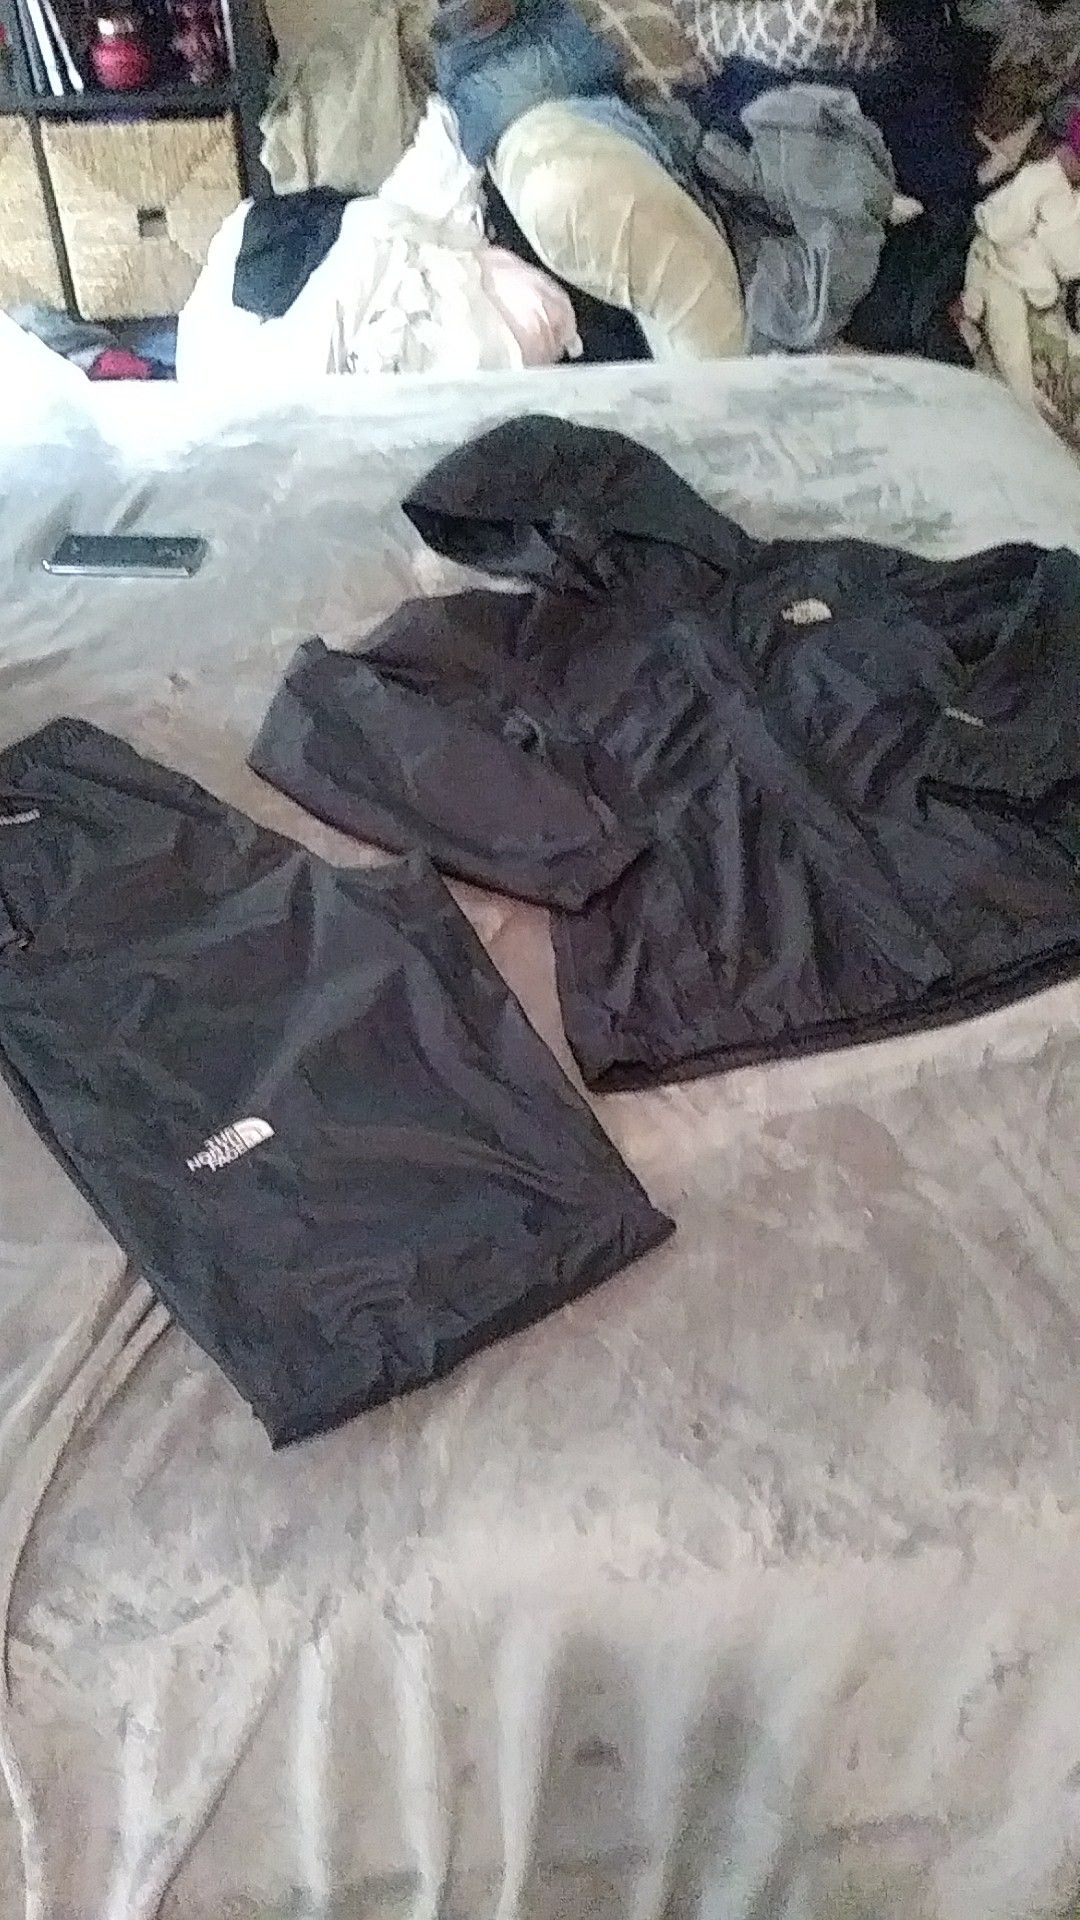 North Face - Hyvent matching top and bottom set